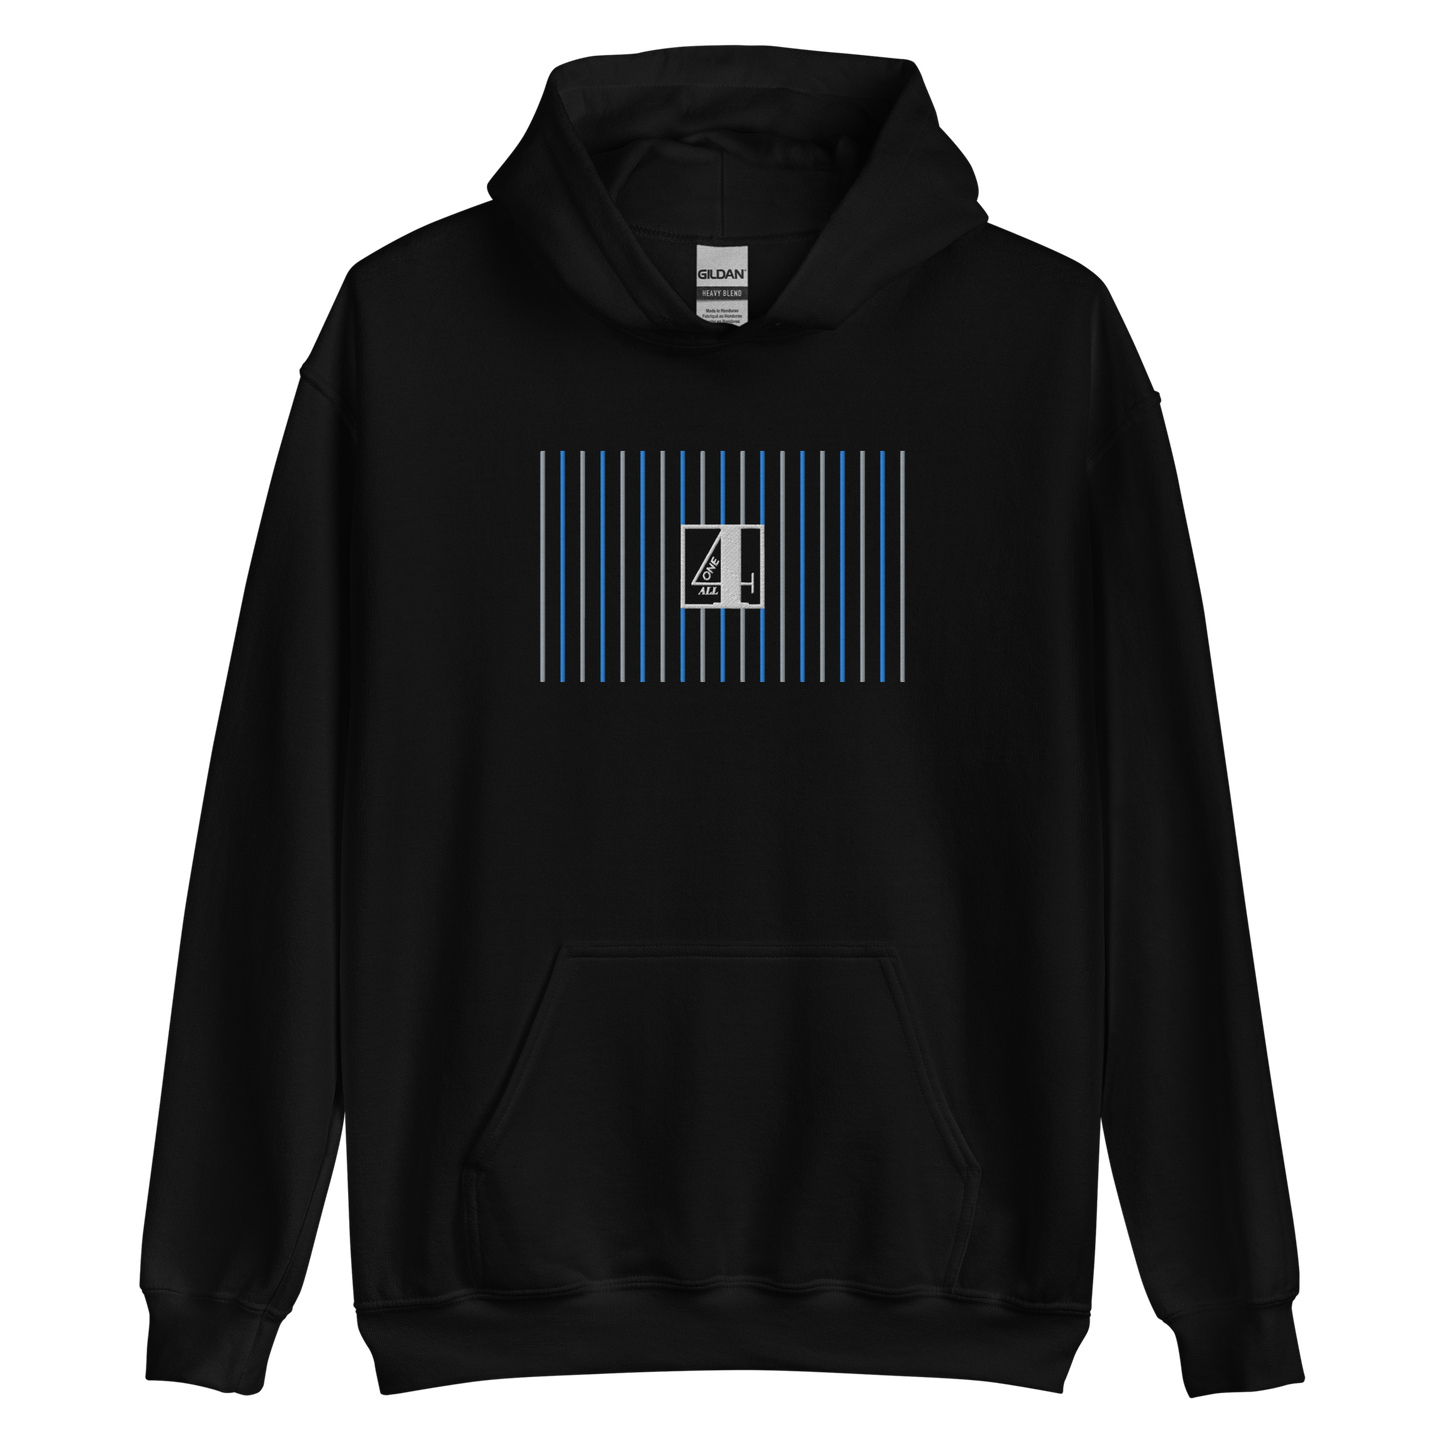 "ONE4ALL RETRO" Embroidered Pullover Hoodie Black (Mens/Womens)